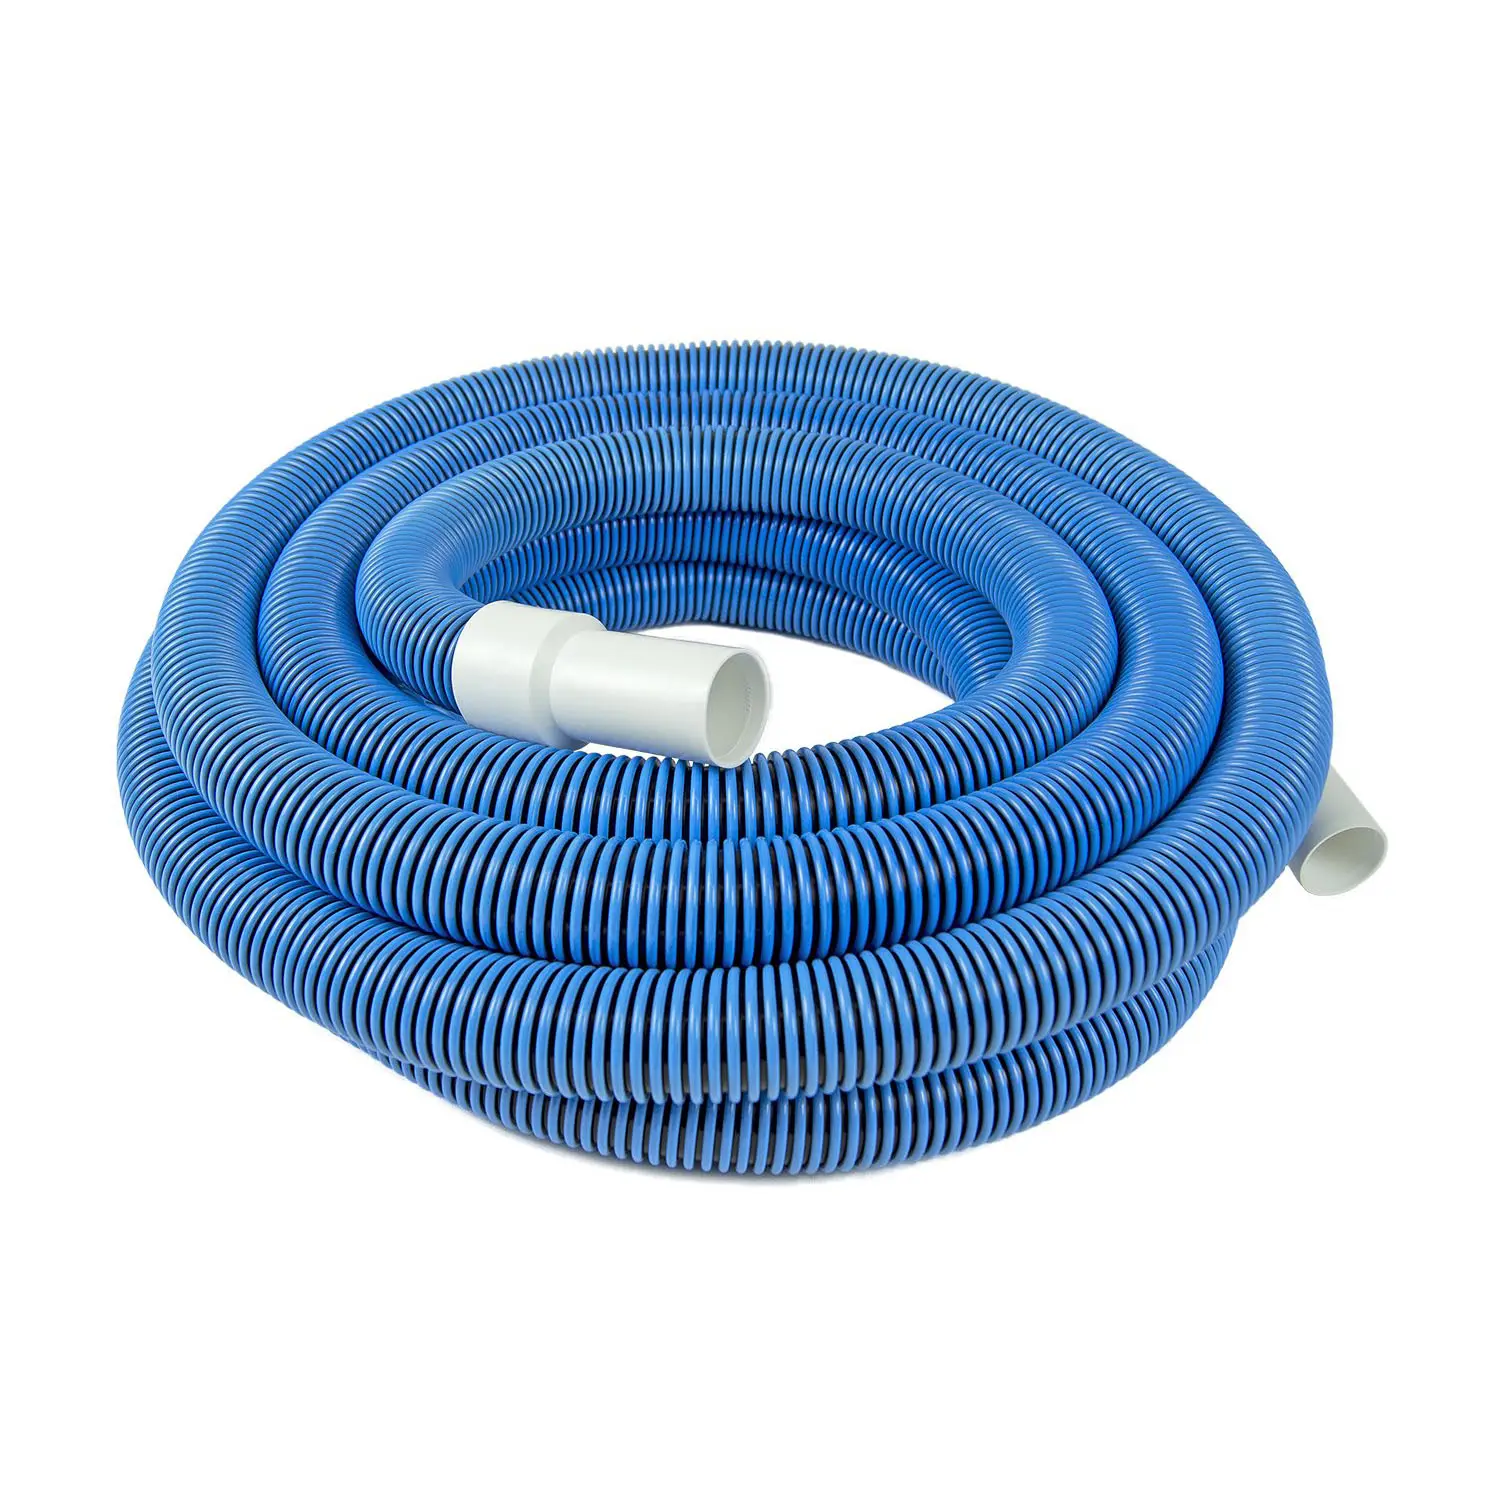 1.5 Inch Spare Parts Supplies Pvc Expandable Retractable Crushproof Bulk Cleaner Vacuum Pipe Hose for Swimming Pool